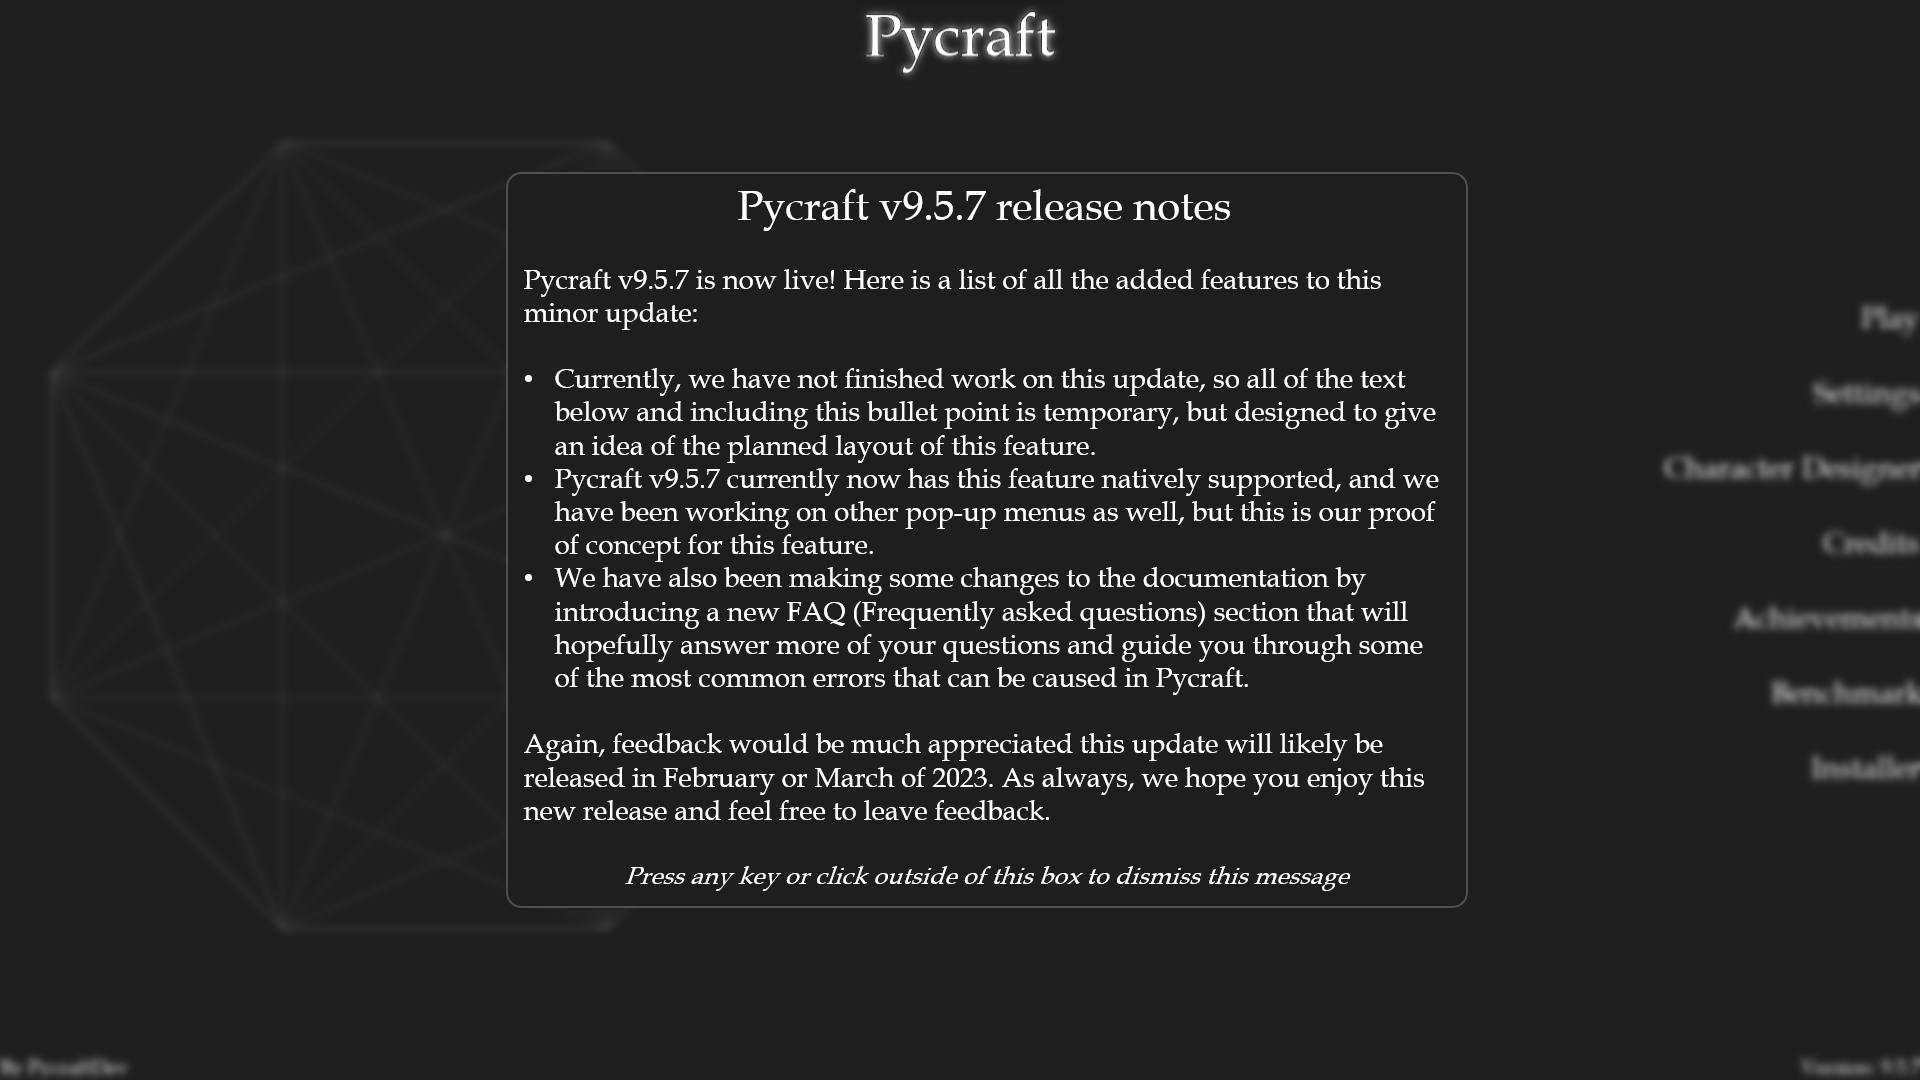 Pycraft's new update notes pop-up with temporary text